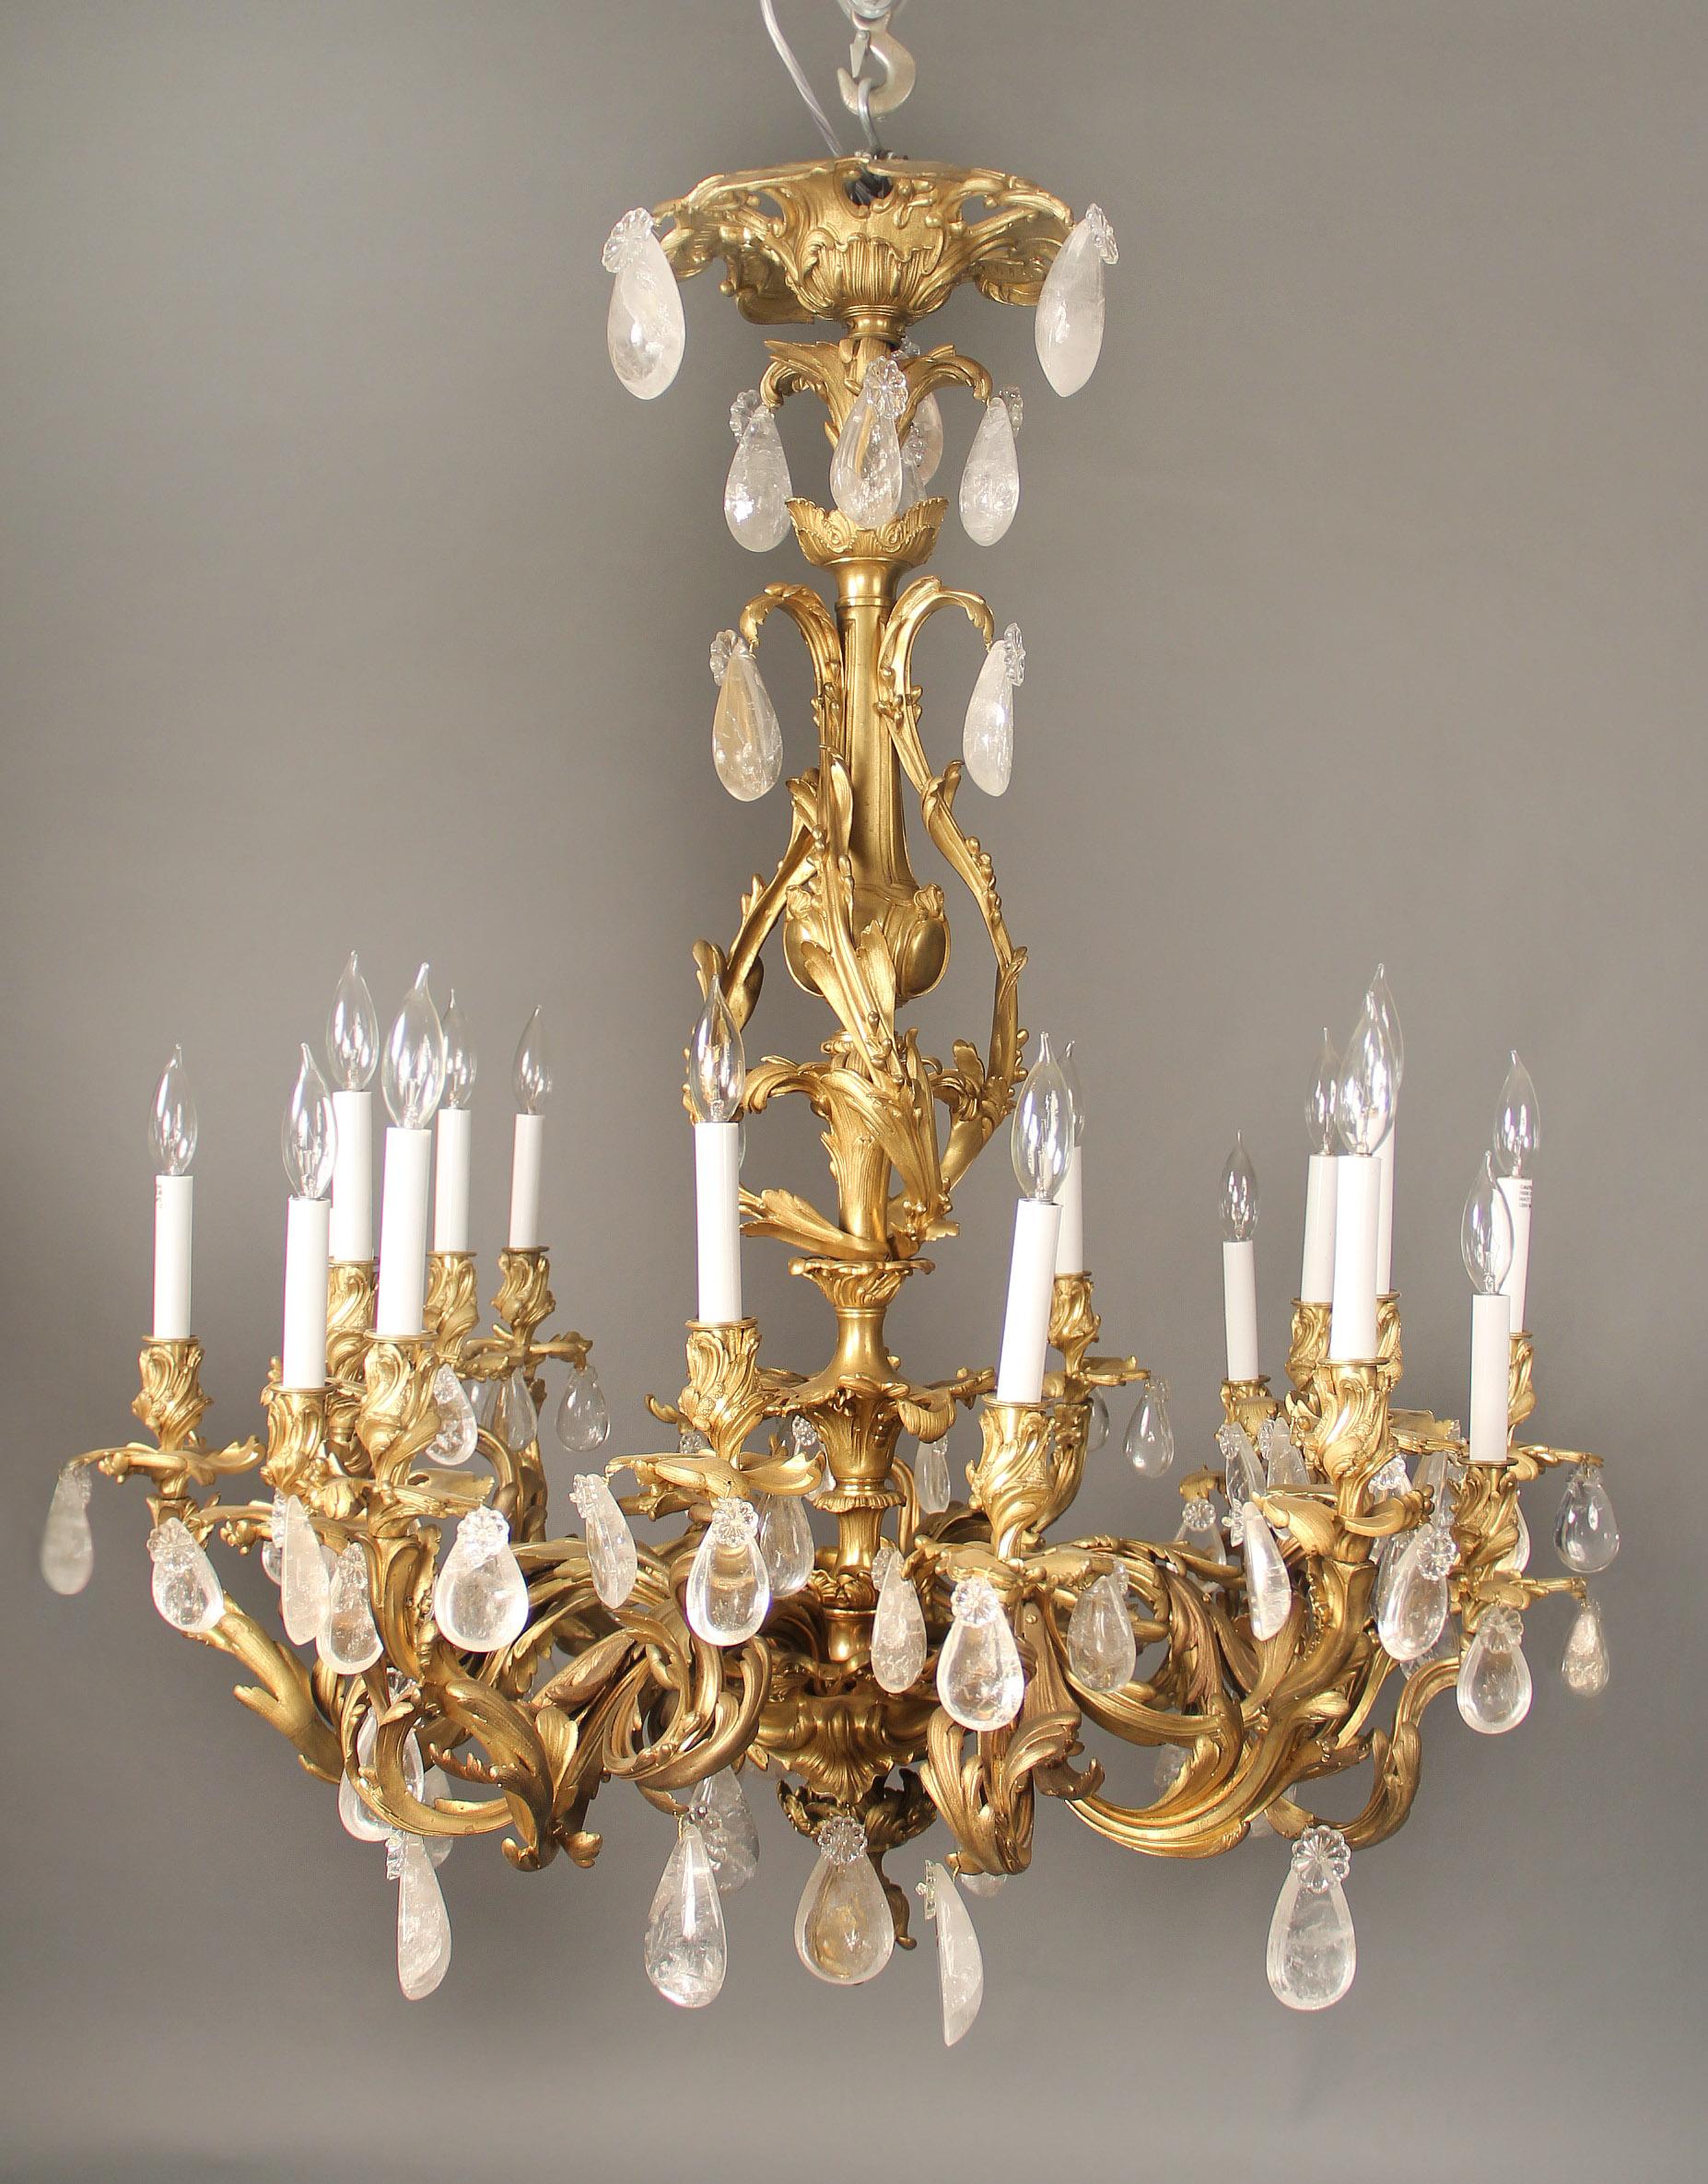 A fine late 19th century gilt bronze and rock crystal eighteen light chandelier

Tear shaped rock crystal, heavy bronze foliage designed arms, the central column with a large urn and the base ending with a floral acorn, eighteen perimeter lights.